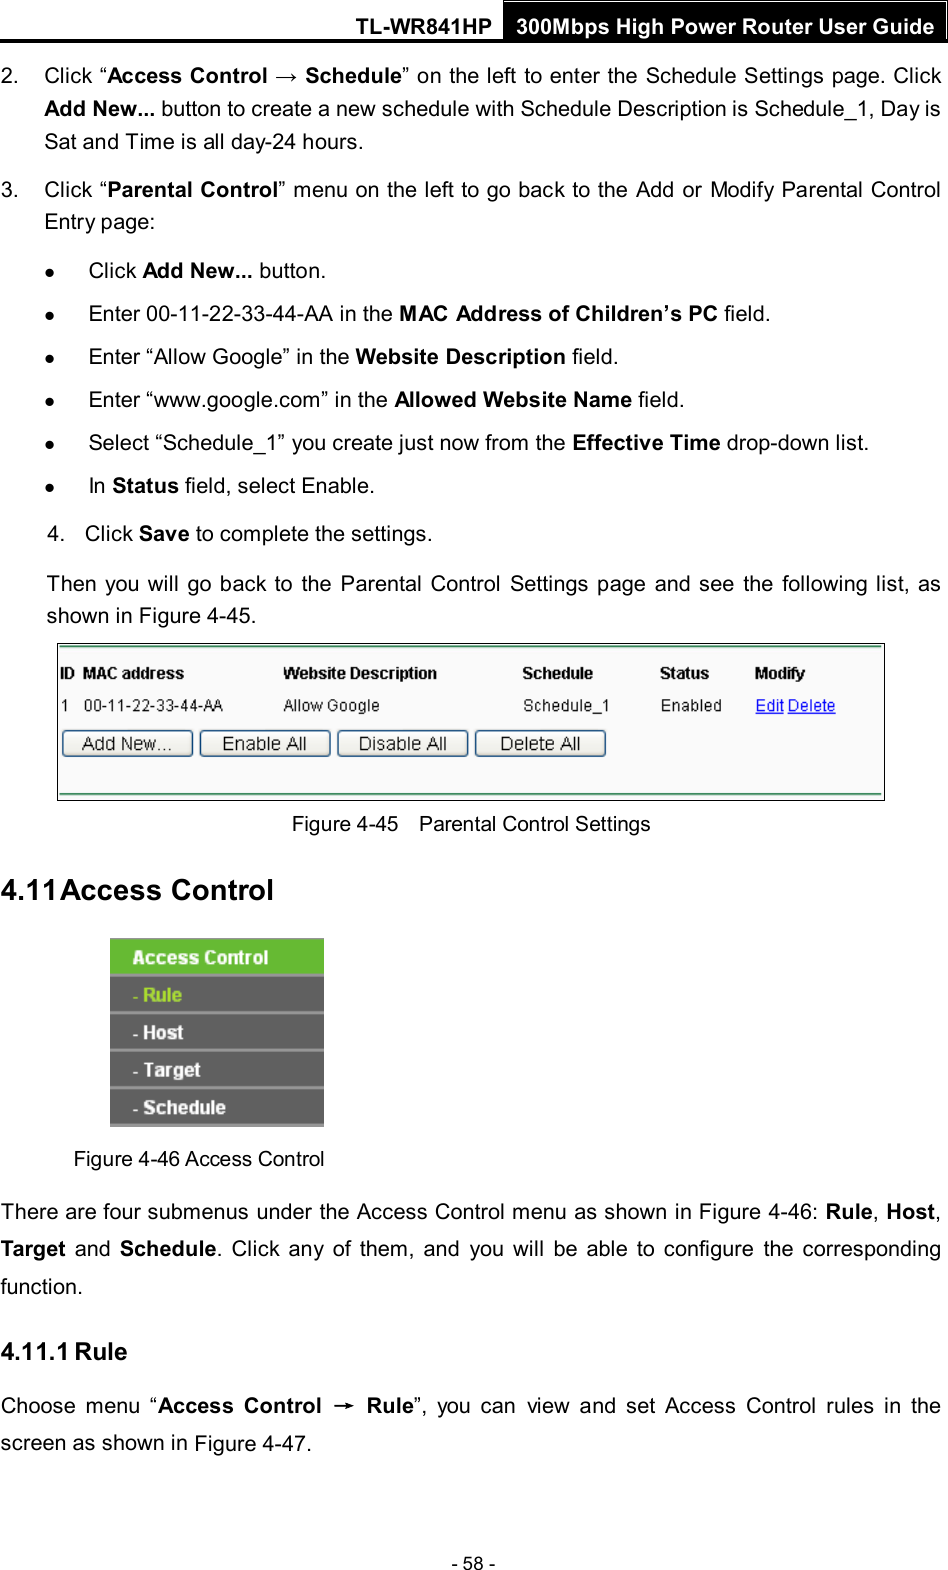 TL-WR841HP 300Mbps High Power Router User Guide  - 58 - 2. Click “Access Control → Schedule” on the left to enter the Schedule Settings page. Click Add New... button to create a new schedule with Schedule Description is Schedule_1, Day is Sat and Time is all day-24 hours.   3. Click “Parental Control” menu on the left to go back to the Add or Modify Parental Control Entry page:    Click Add New... button.    Enter 00-11-22-33-44-AA in the MAC Address of Children’s PC field.    Enter “Allow Google” in the Website Description field.    Enter “www.google.com” in the Allowed Website Name field.    Select “Schedule_1” you create just now from the Effective Time drop-down list.    In Status field, select Enable.   4. Click Save to complete the settings. Then you will go back to the Parental Control Settings page and see the following list, as shown in Figure 4-45.  Figure 4-45  Parental Control Settings 4.11 Access Control  Figure 4-46 Access Control There are four submenus under the Access Control menu as shown in Figure 4-46: Rule, Host, Target and Schedule.  Click any of them, and you will be able to configure the corresponding function. 4.11.1 Rule Choose menu “Access Control → Rule”, you can view and set Access Control rules  in the screen as shown in Figure 4-47.   